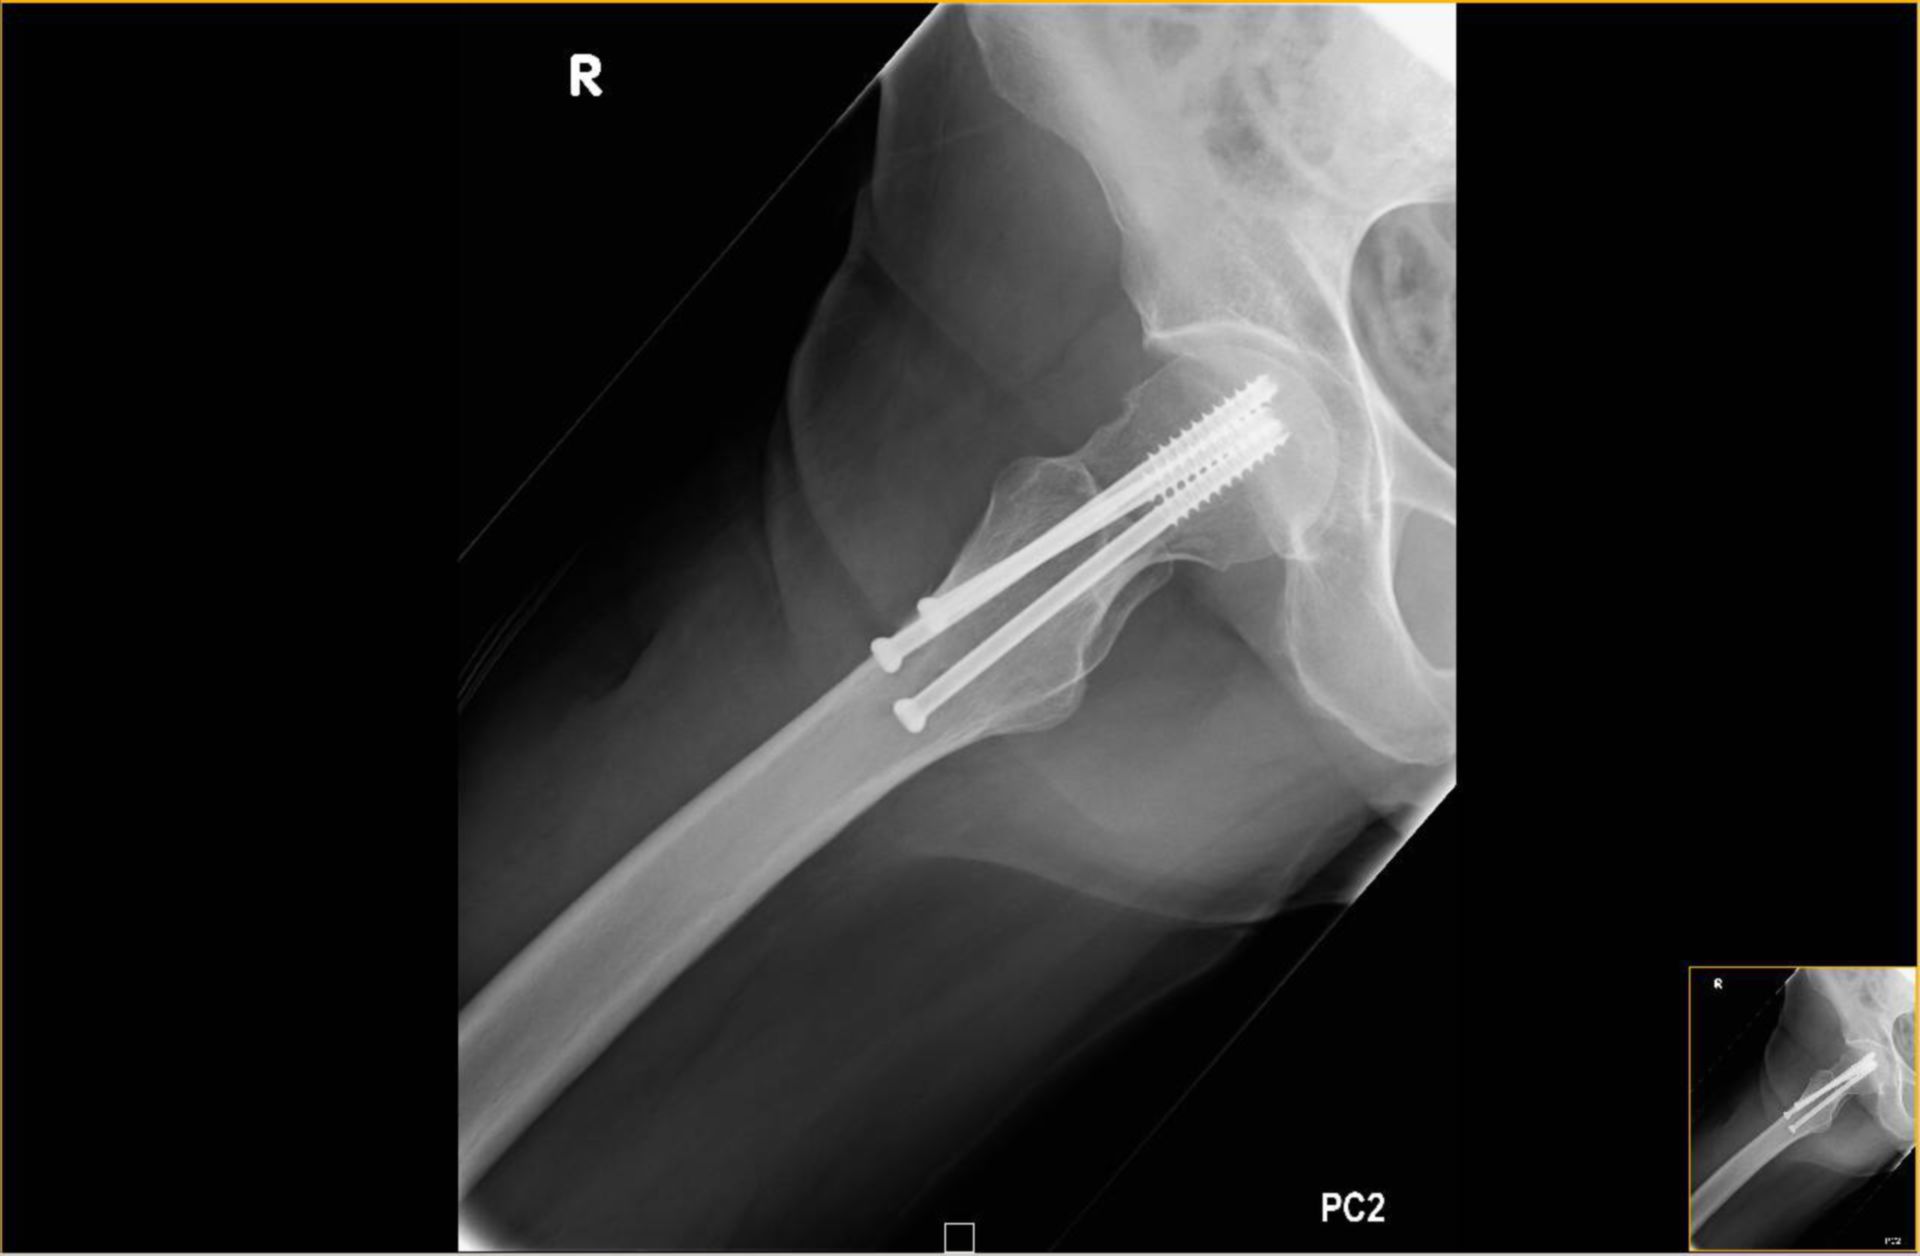 Skrew osteosynthesis of medial femoral neck fracture